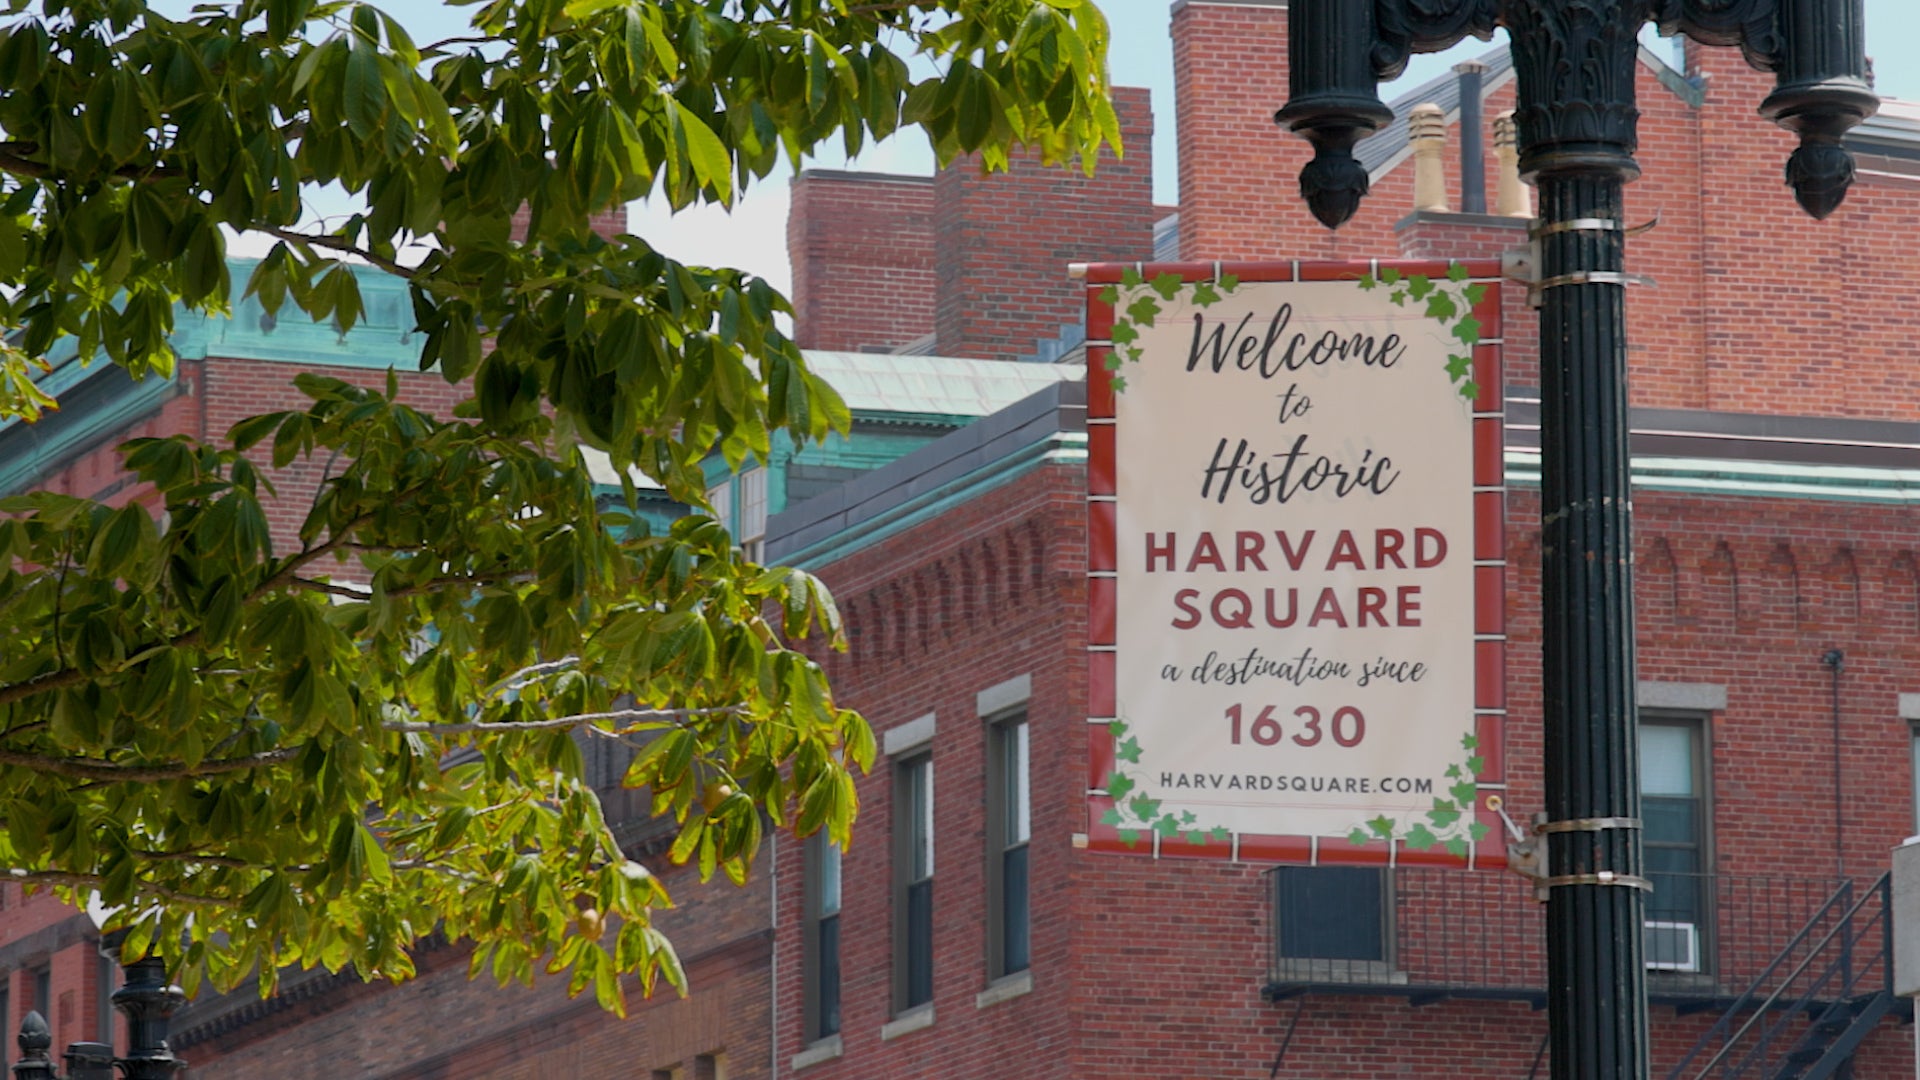 Sign welcomes visitors to Harvard Square.